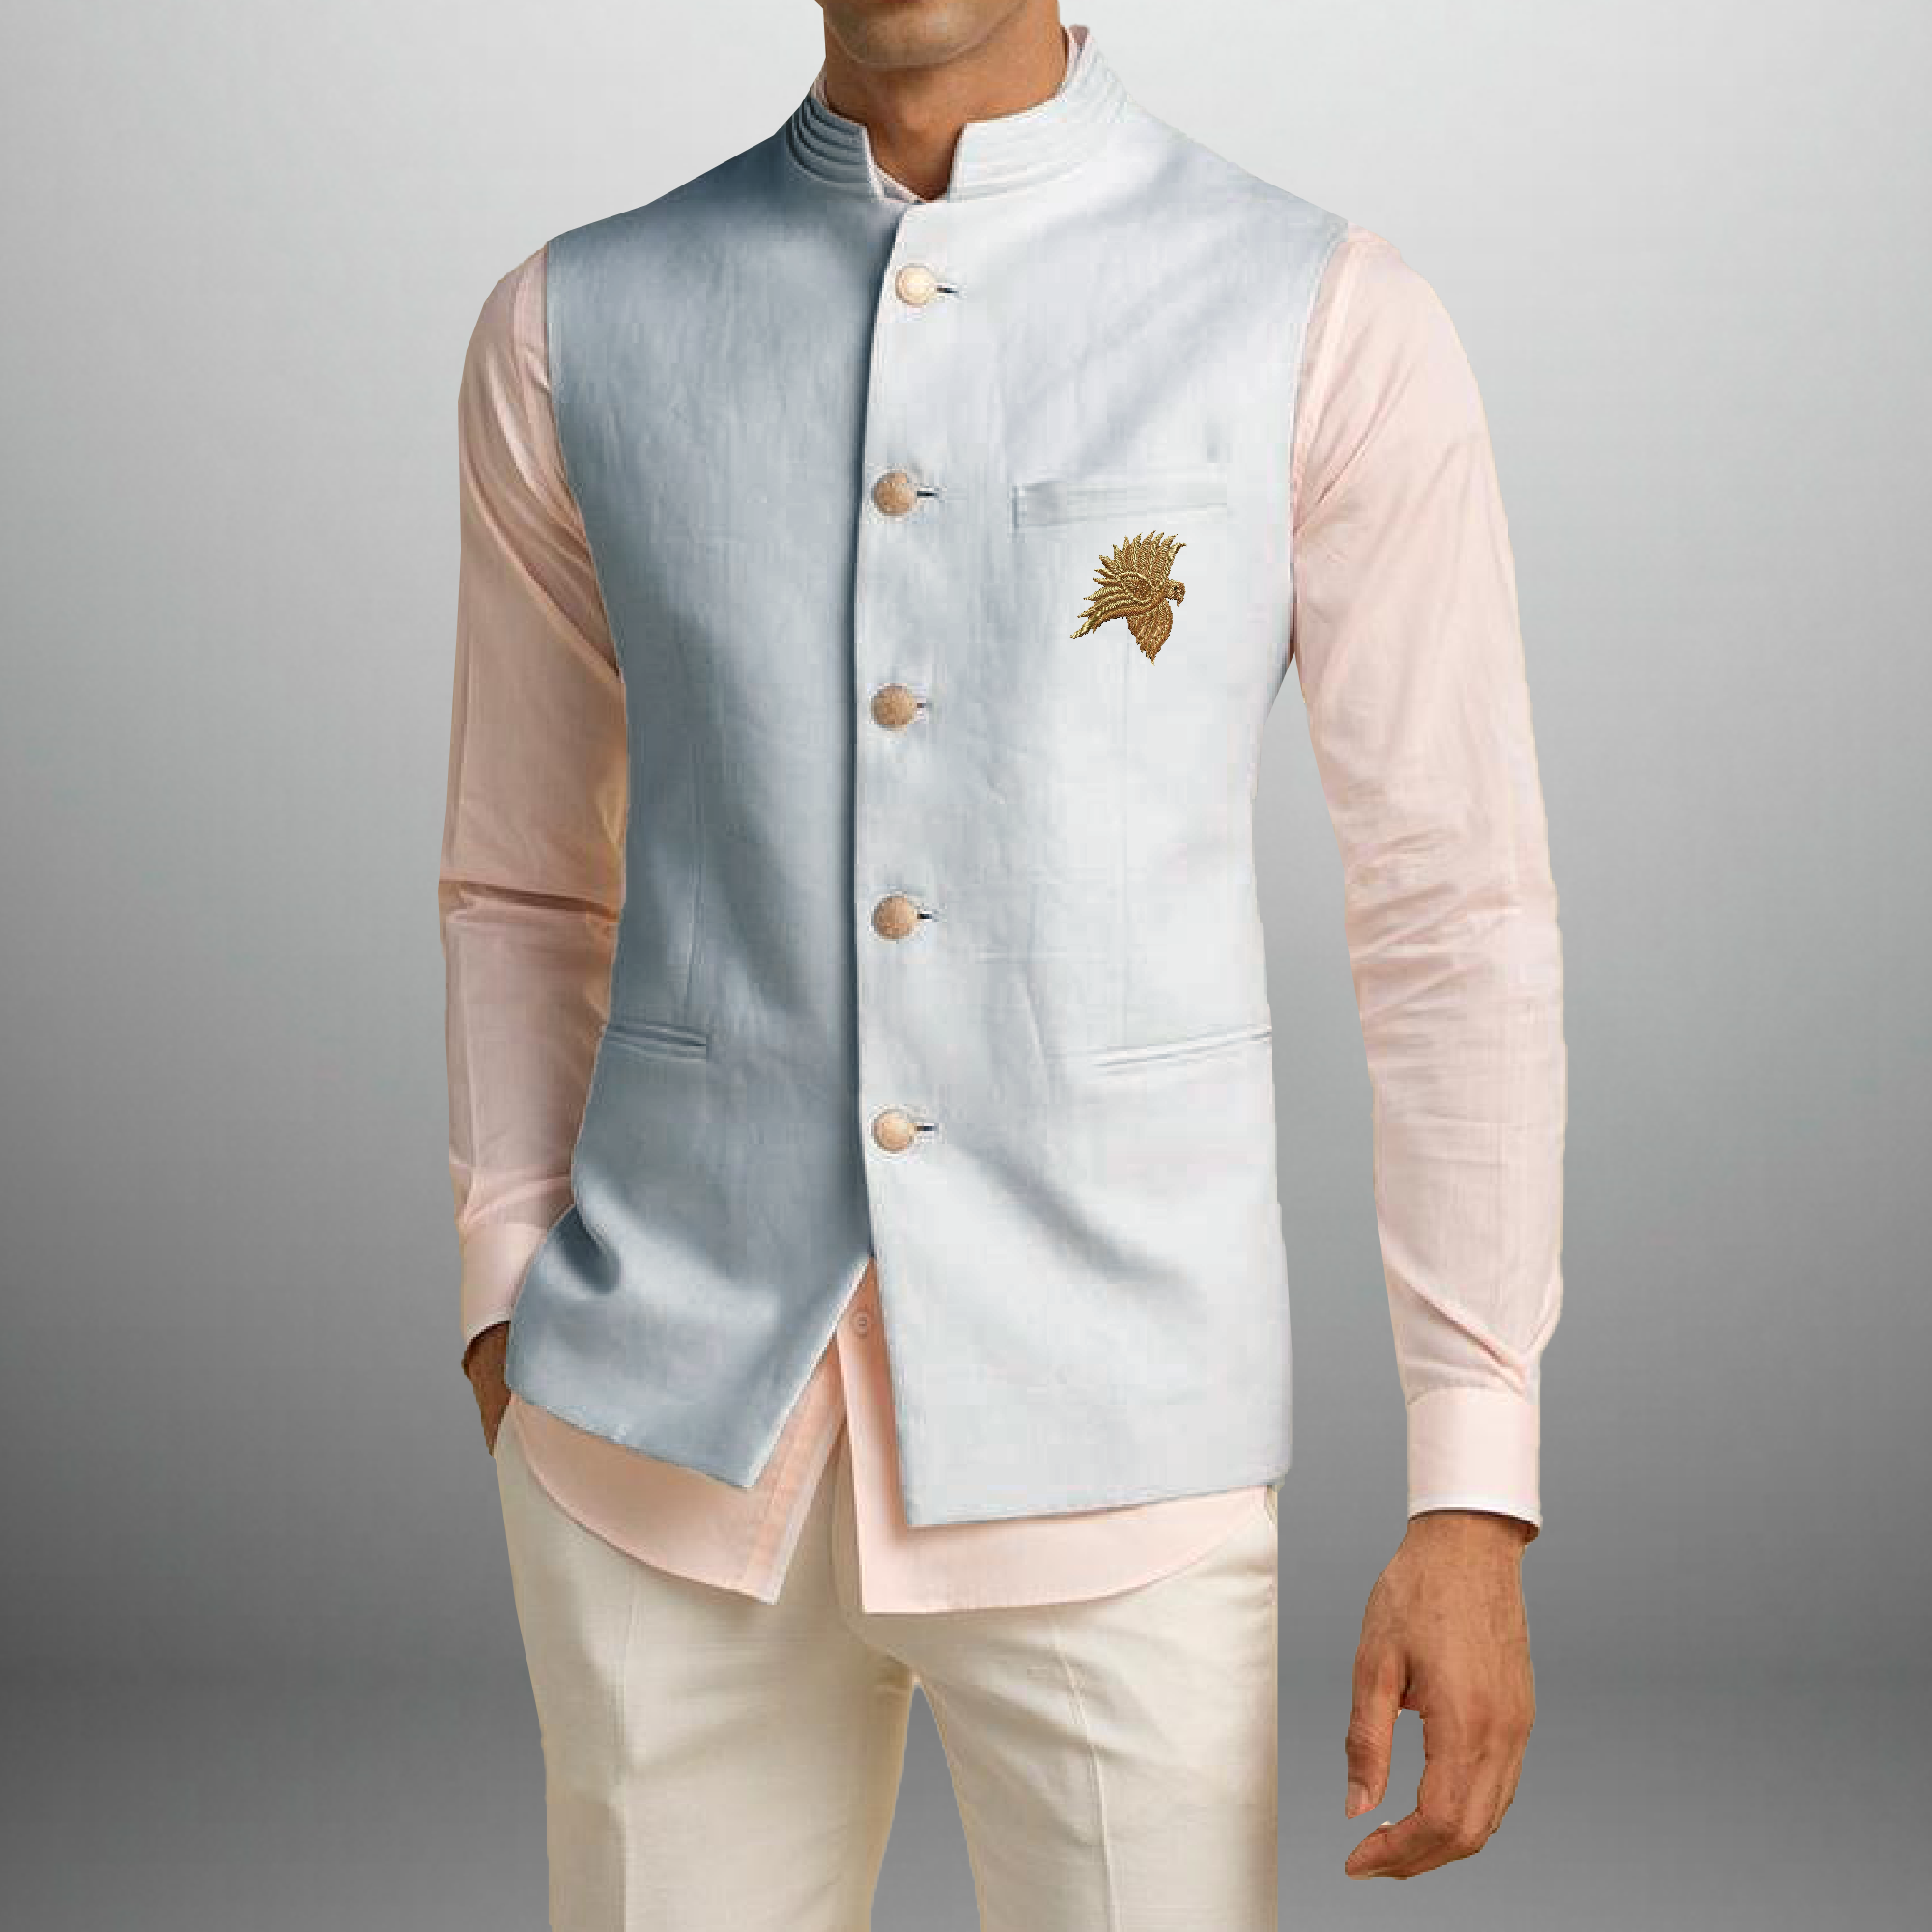 Men's Light Blue waistcoat with front Golden embroidery-RMWC002